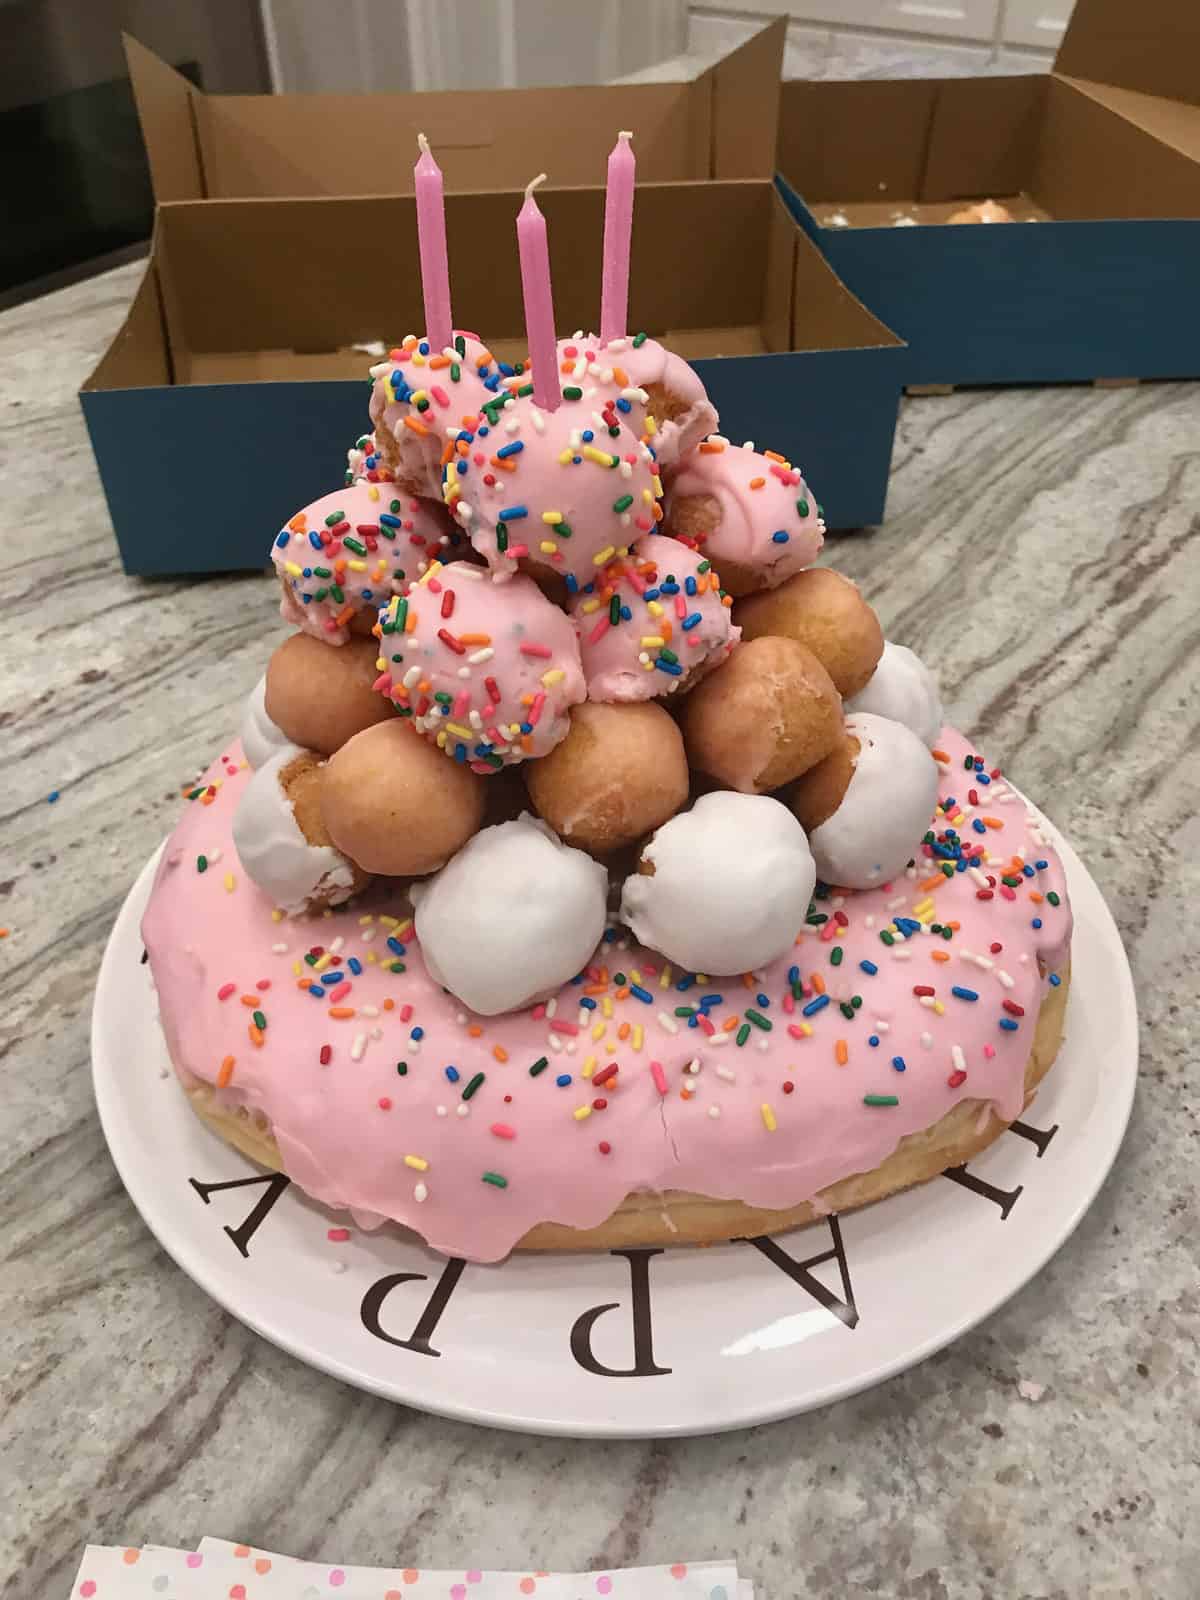 Brookie's Third Birthday Donut Cake with Donut Holes by The Bakermama